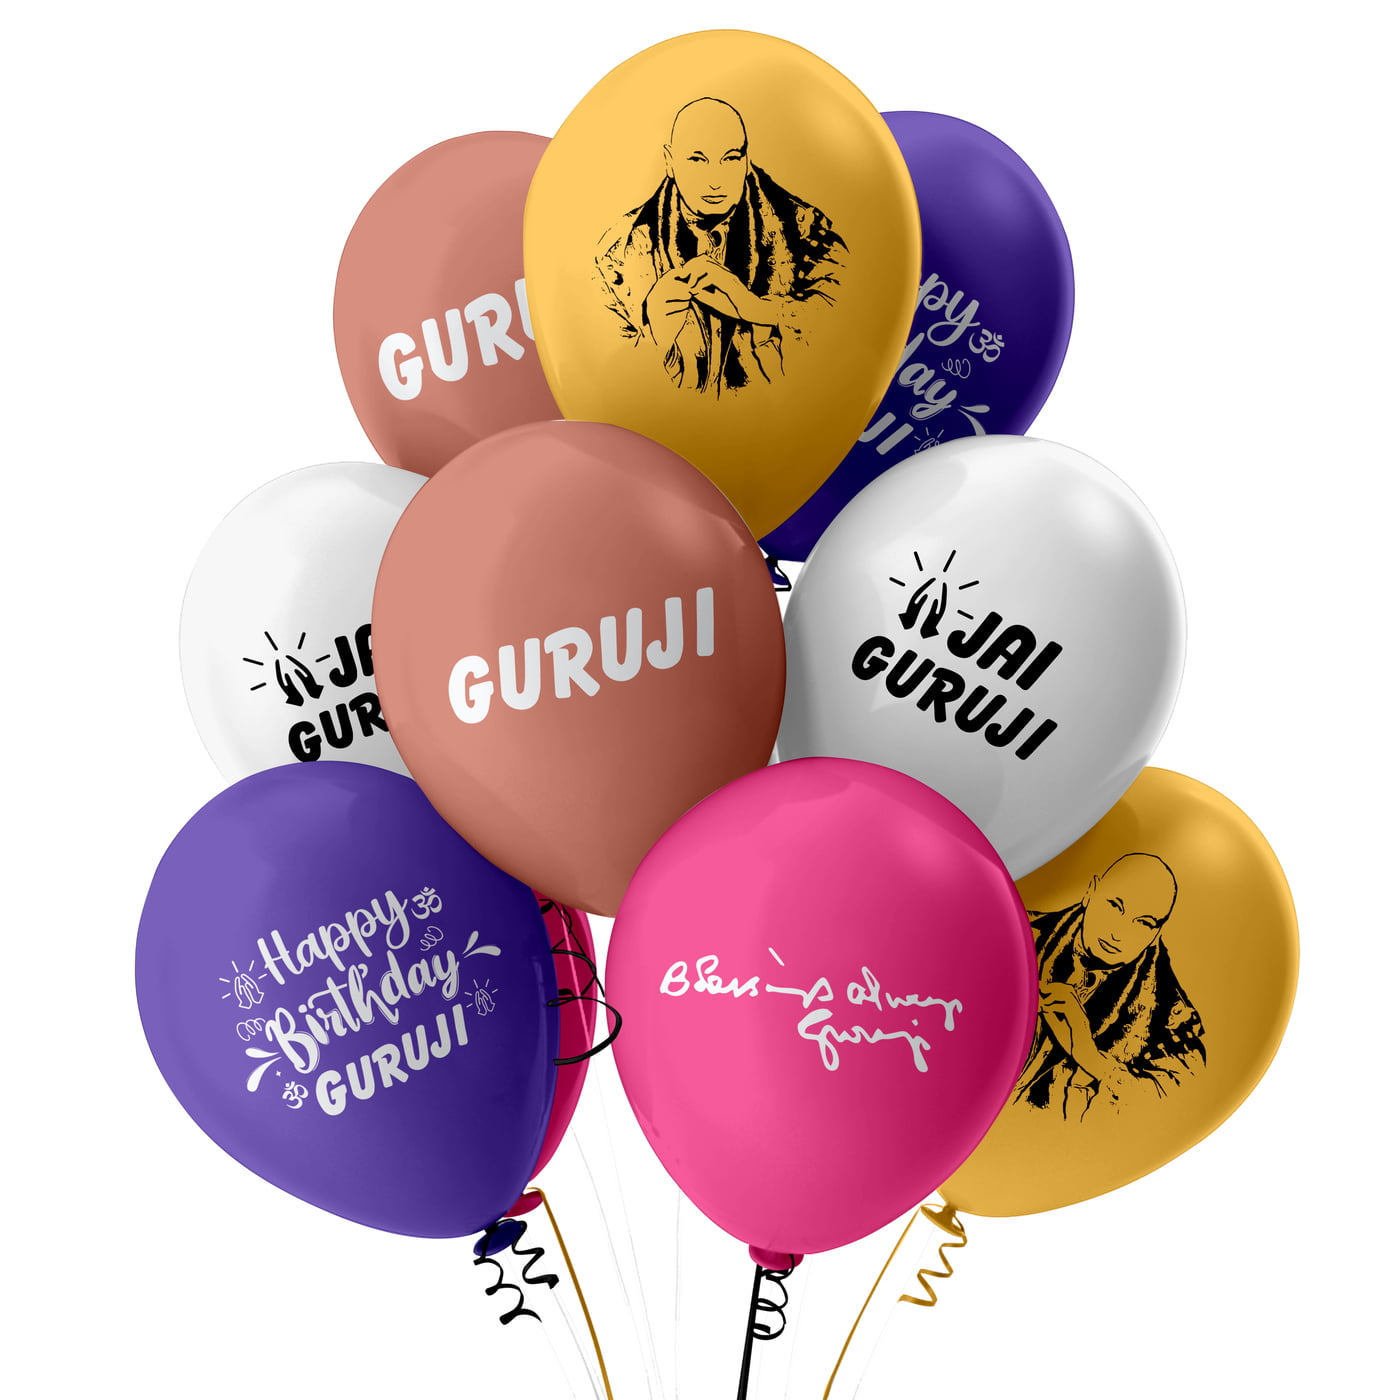 The Magic Balloons - Set of 50 pcs Celebrate the special day Of Guruji Birthday Printed 12" Balloons Multicolor Metallic Balloons with Guru ji Photo and 4 other design